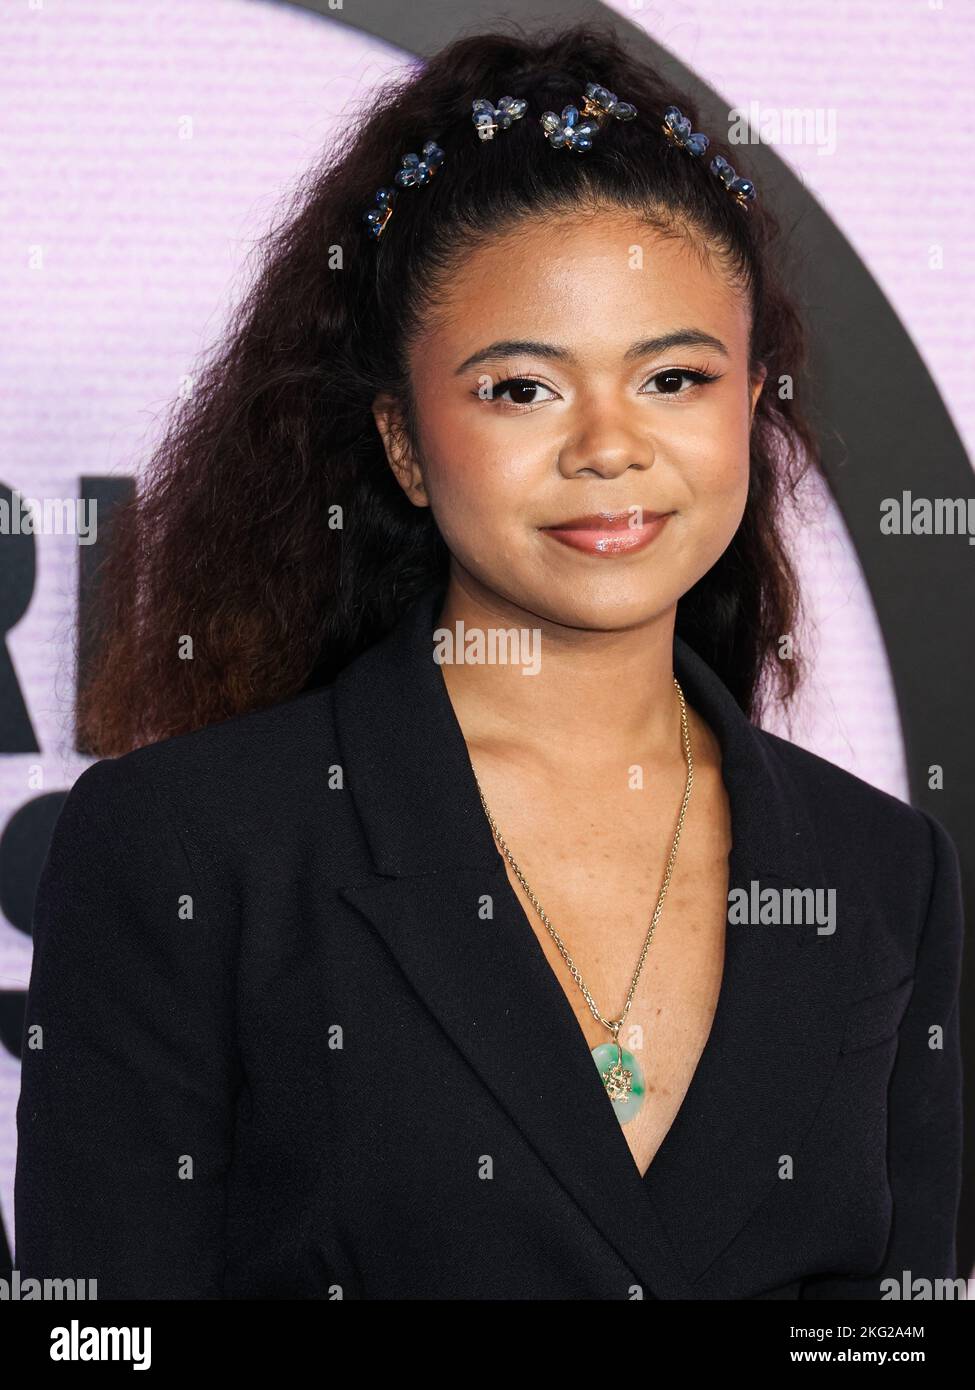 Los Angeles, United States. 20th Nov, 2022. LOS ANGELES, CALIFORNIA, USA - NOVEMBER 20: Maile Masako Brady arrives at the 2022 American Music Awards (50th Annual American Music Awards) held at Microsoft Theater at L.A. Live on November 20, 2022 in Los Angeles, California, United States. (Photo by Xavier Collin/Image Press Agency) Credit: Image Press Agency/Alamy Live News Stock Photo